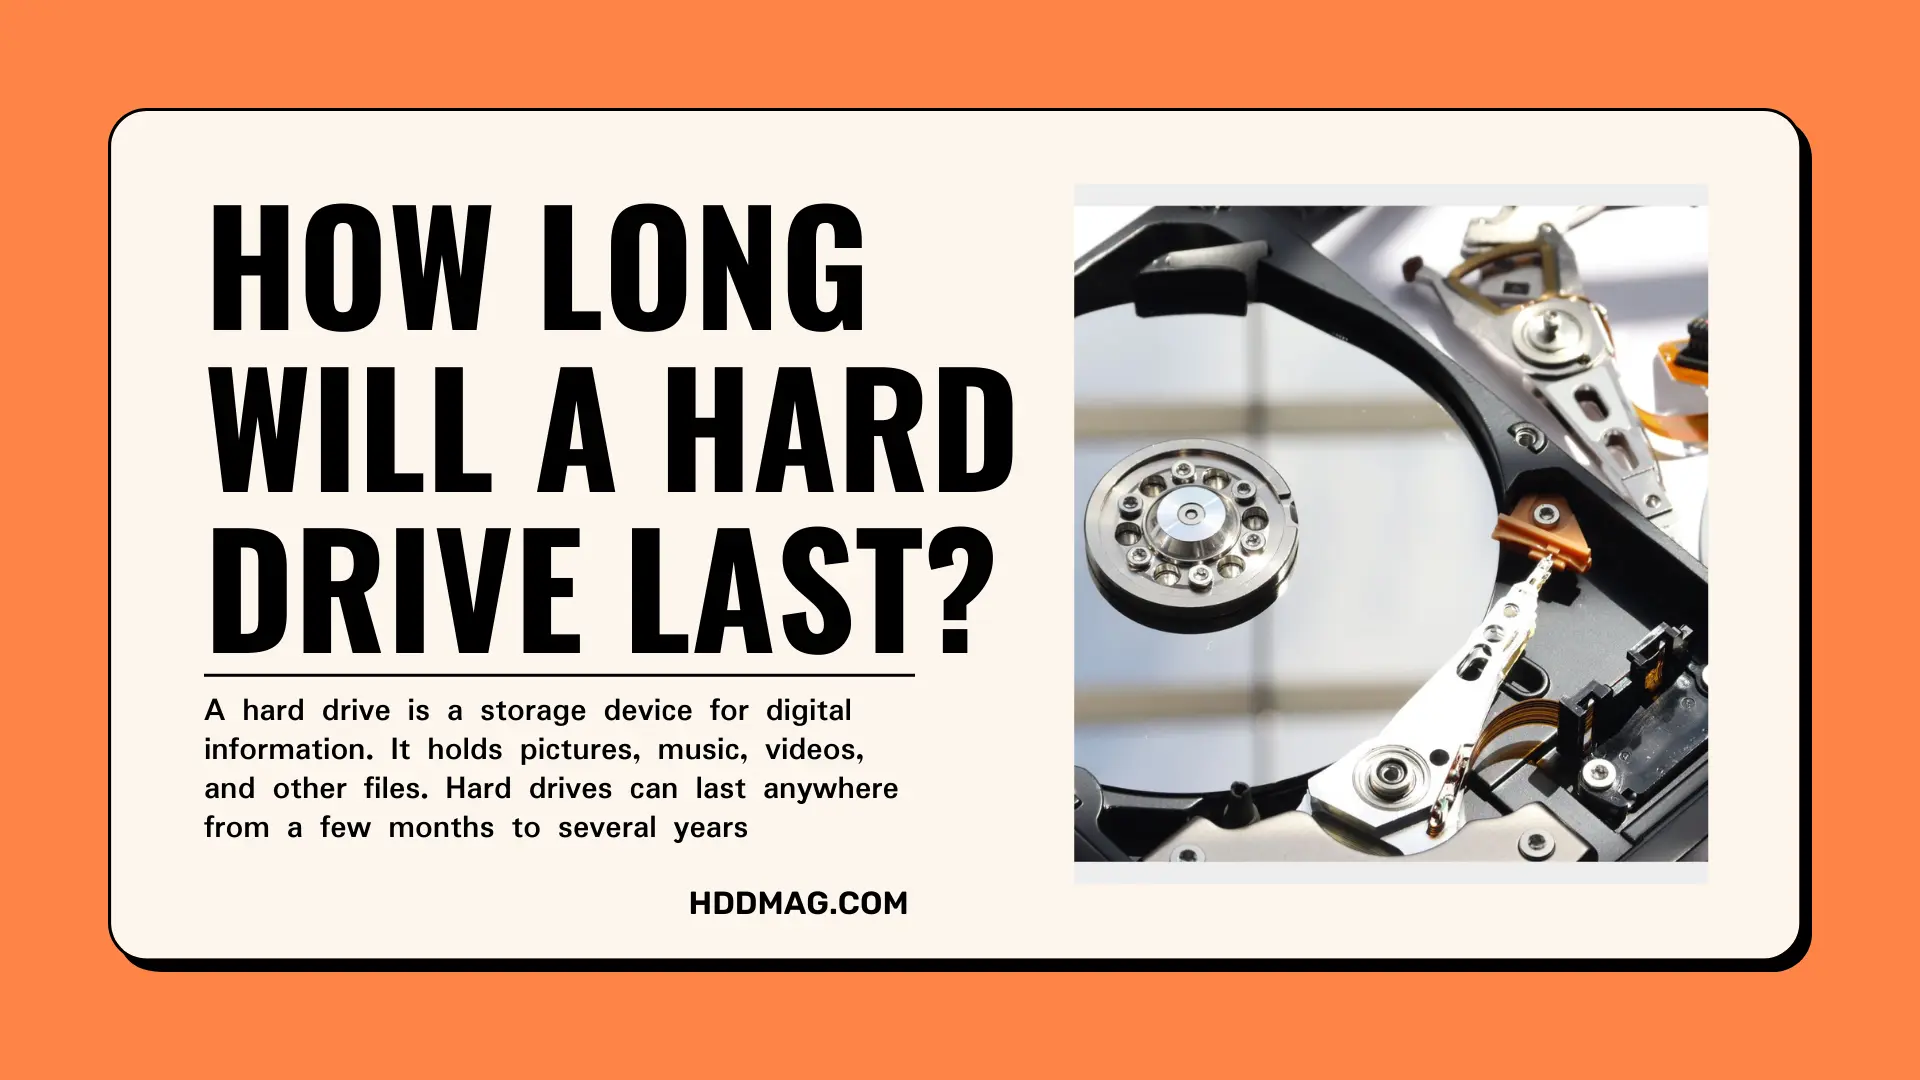 How Long Will a Hard Drive Last?